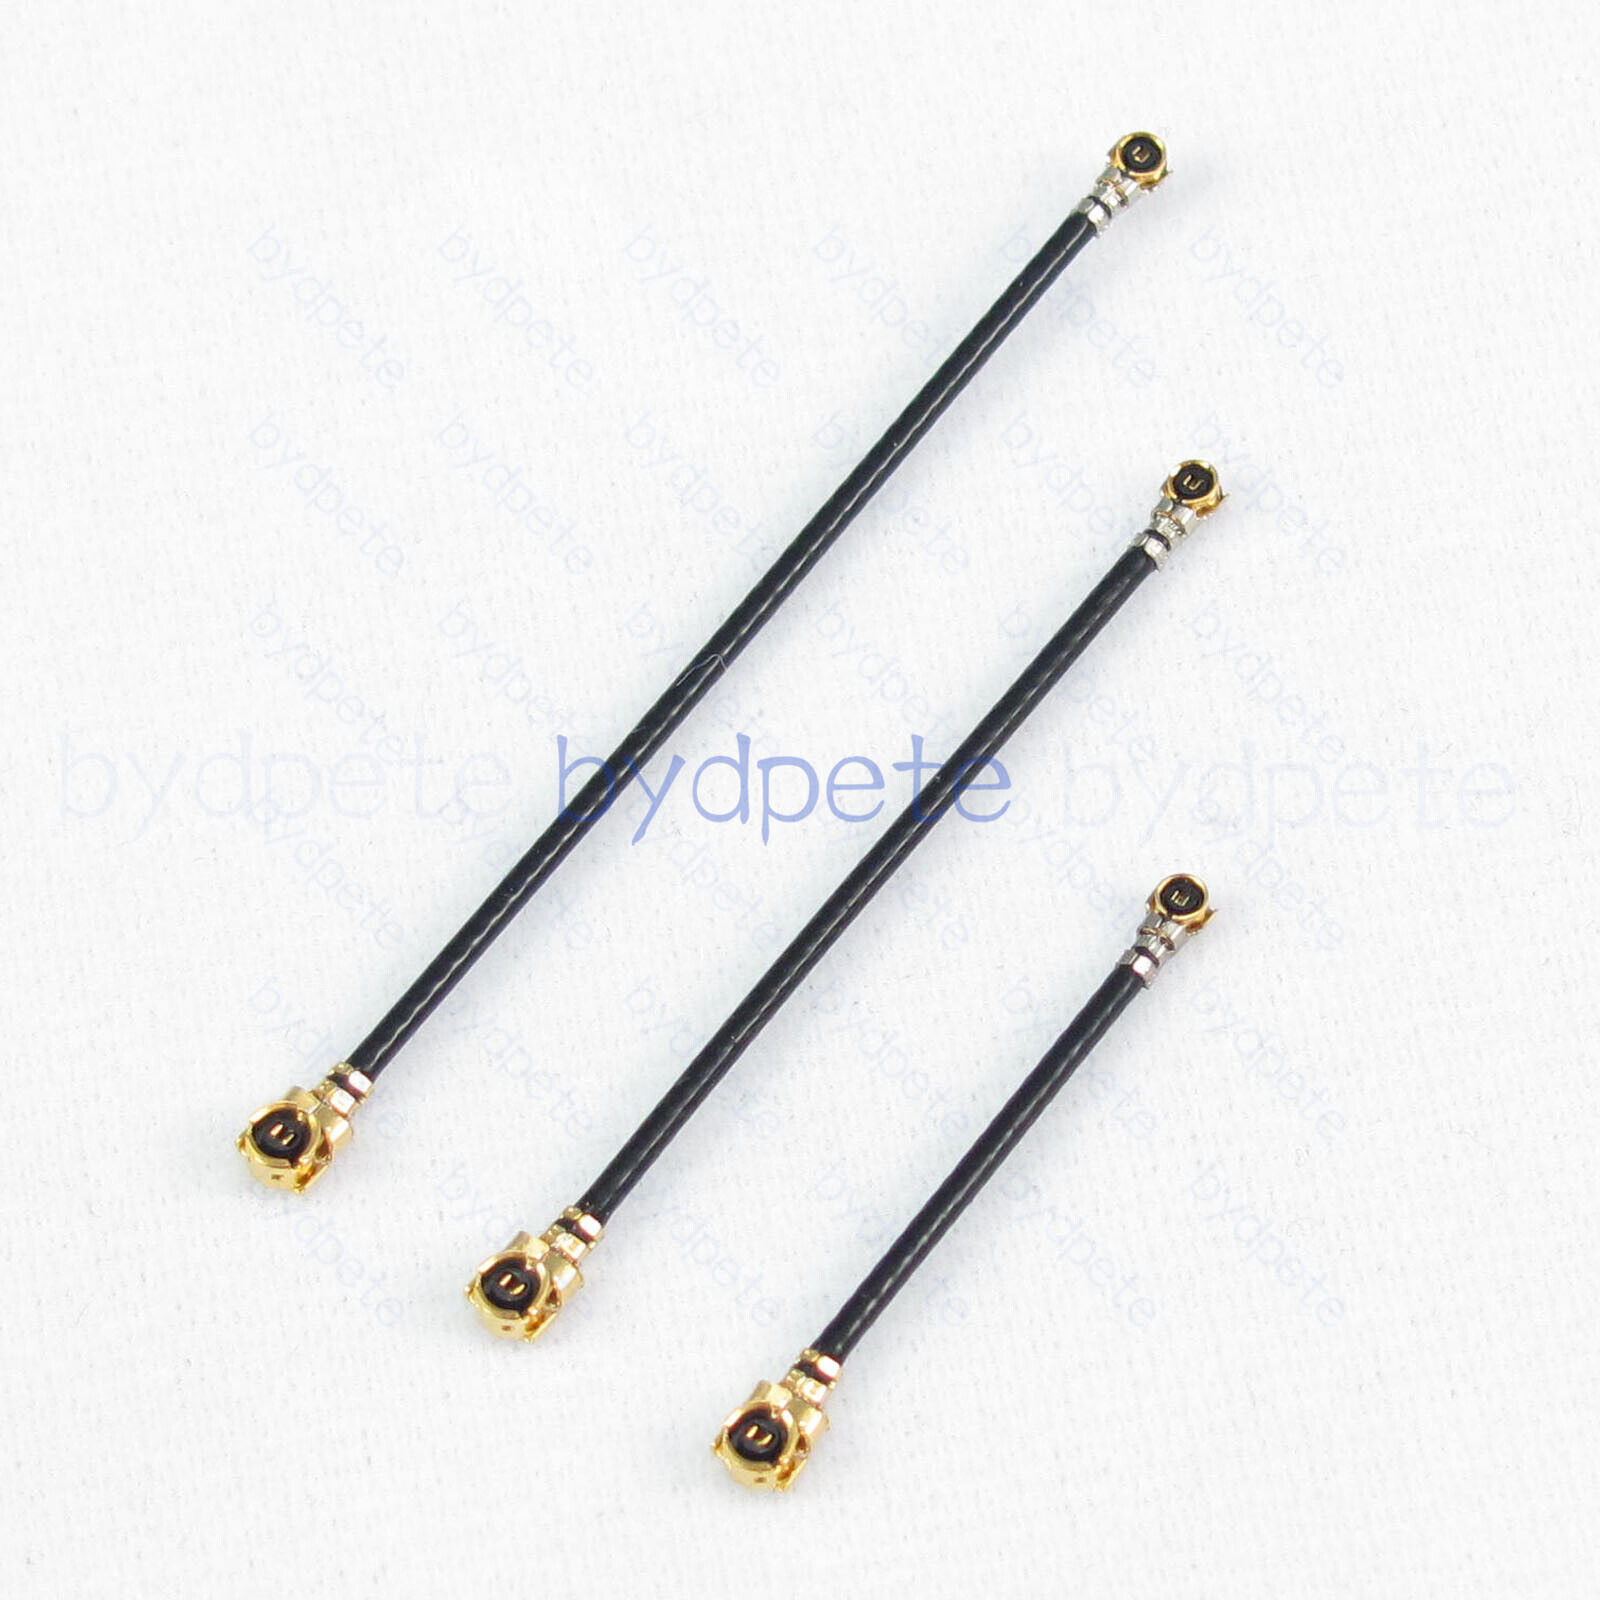 WFL W.FL W'FL MHF4 to UFL U.FL IPX IPEX MHF OD 1.13mm Coaxial cable Kable 50 ohm